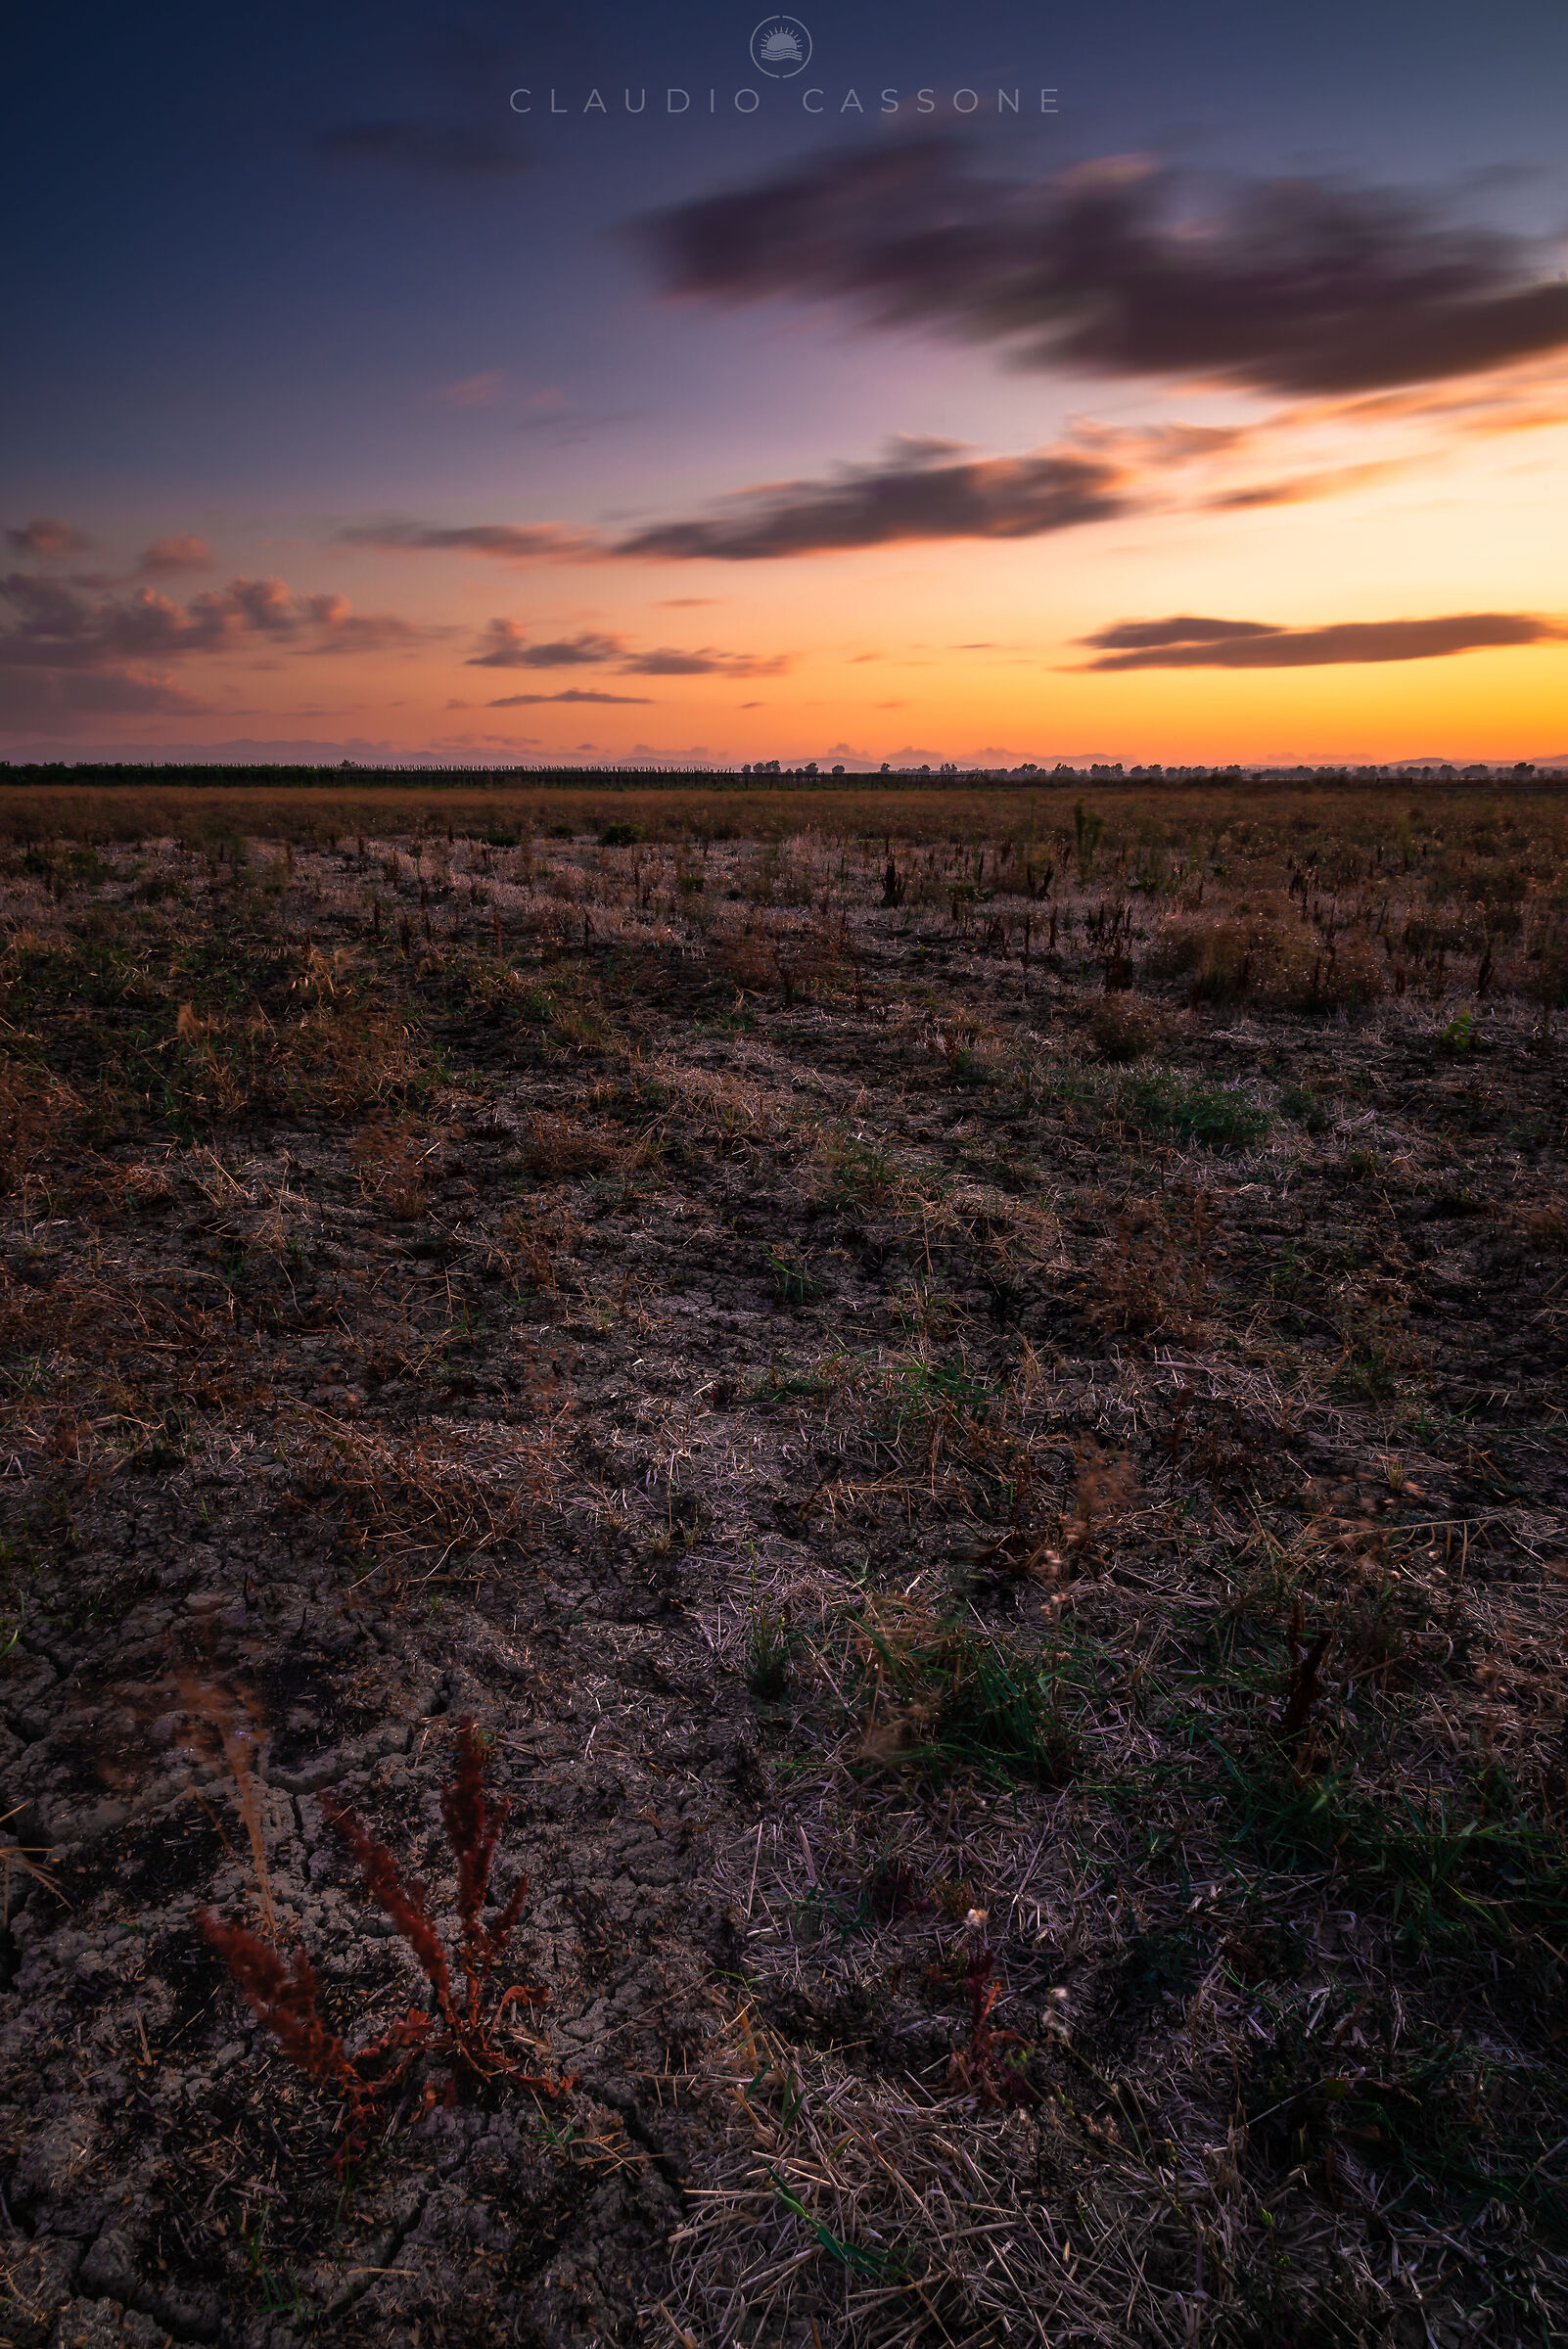 Barren countryside at sunset...